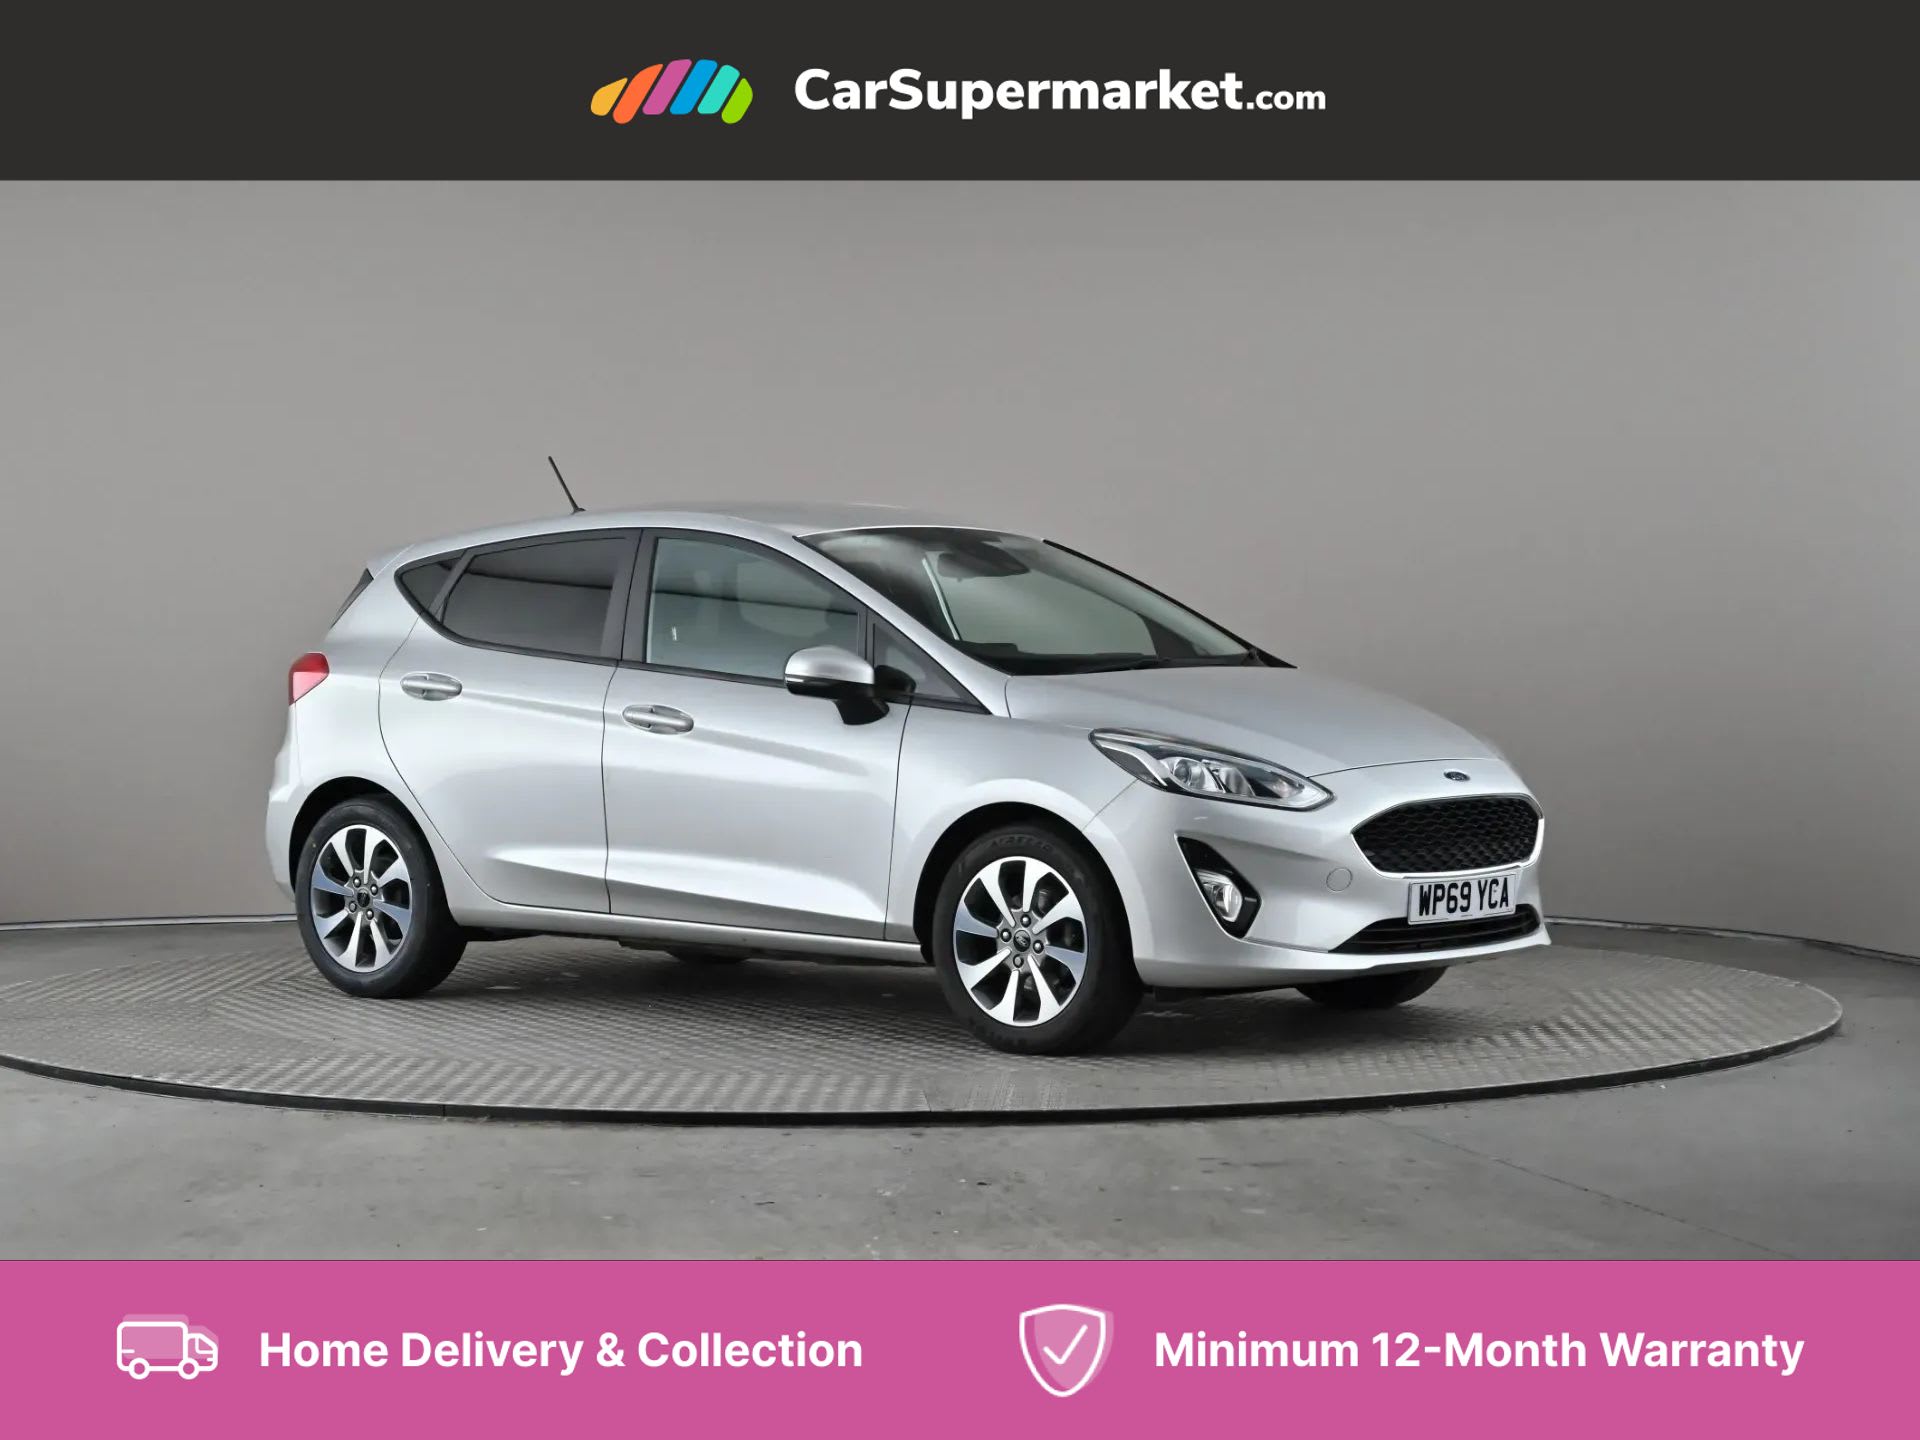 2019 used Ford Fiesta 1.1 Trend